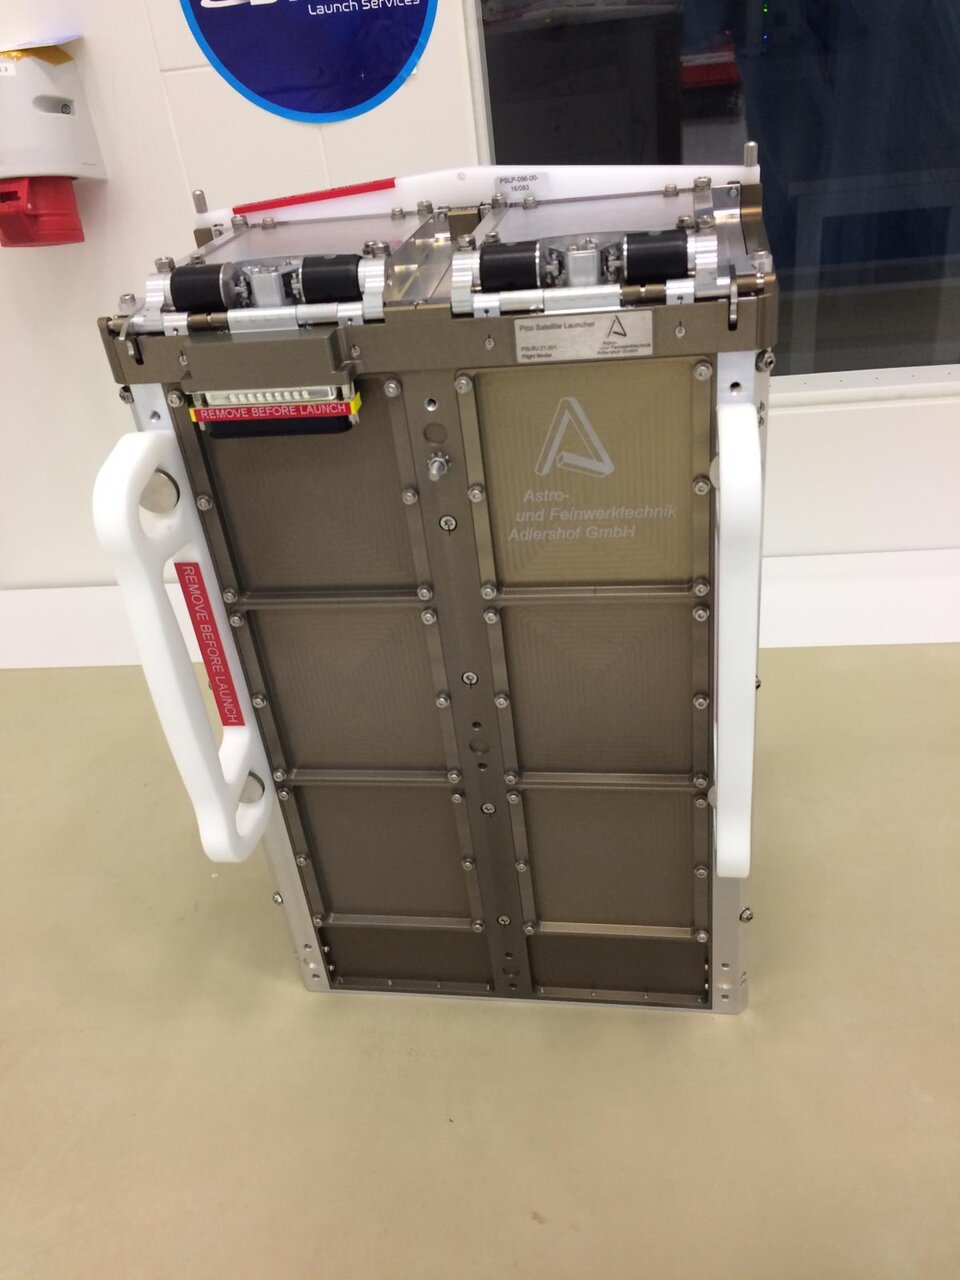 The CubeSats deployer with LEDSAT integrated inside! Ready to be shipped to the European Space Port in French Guiana.